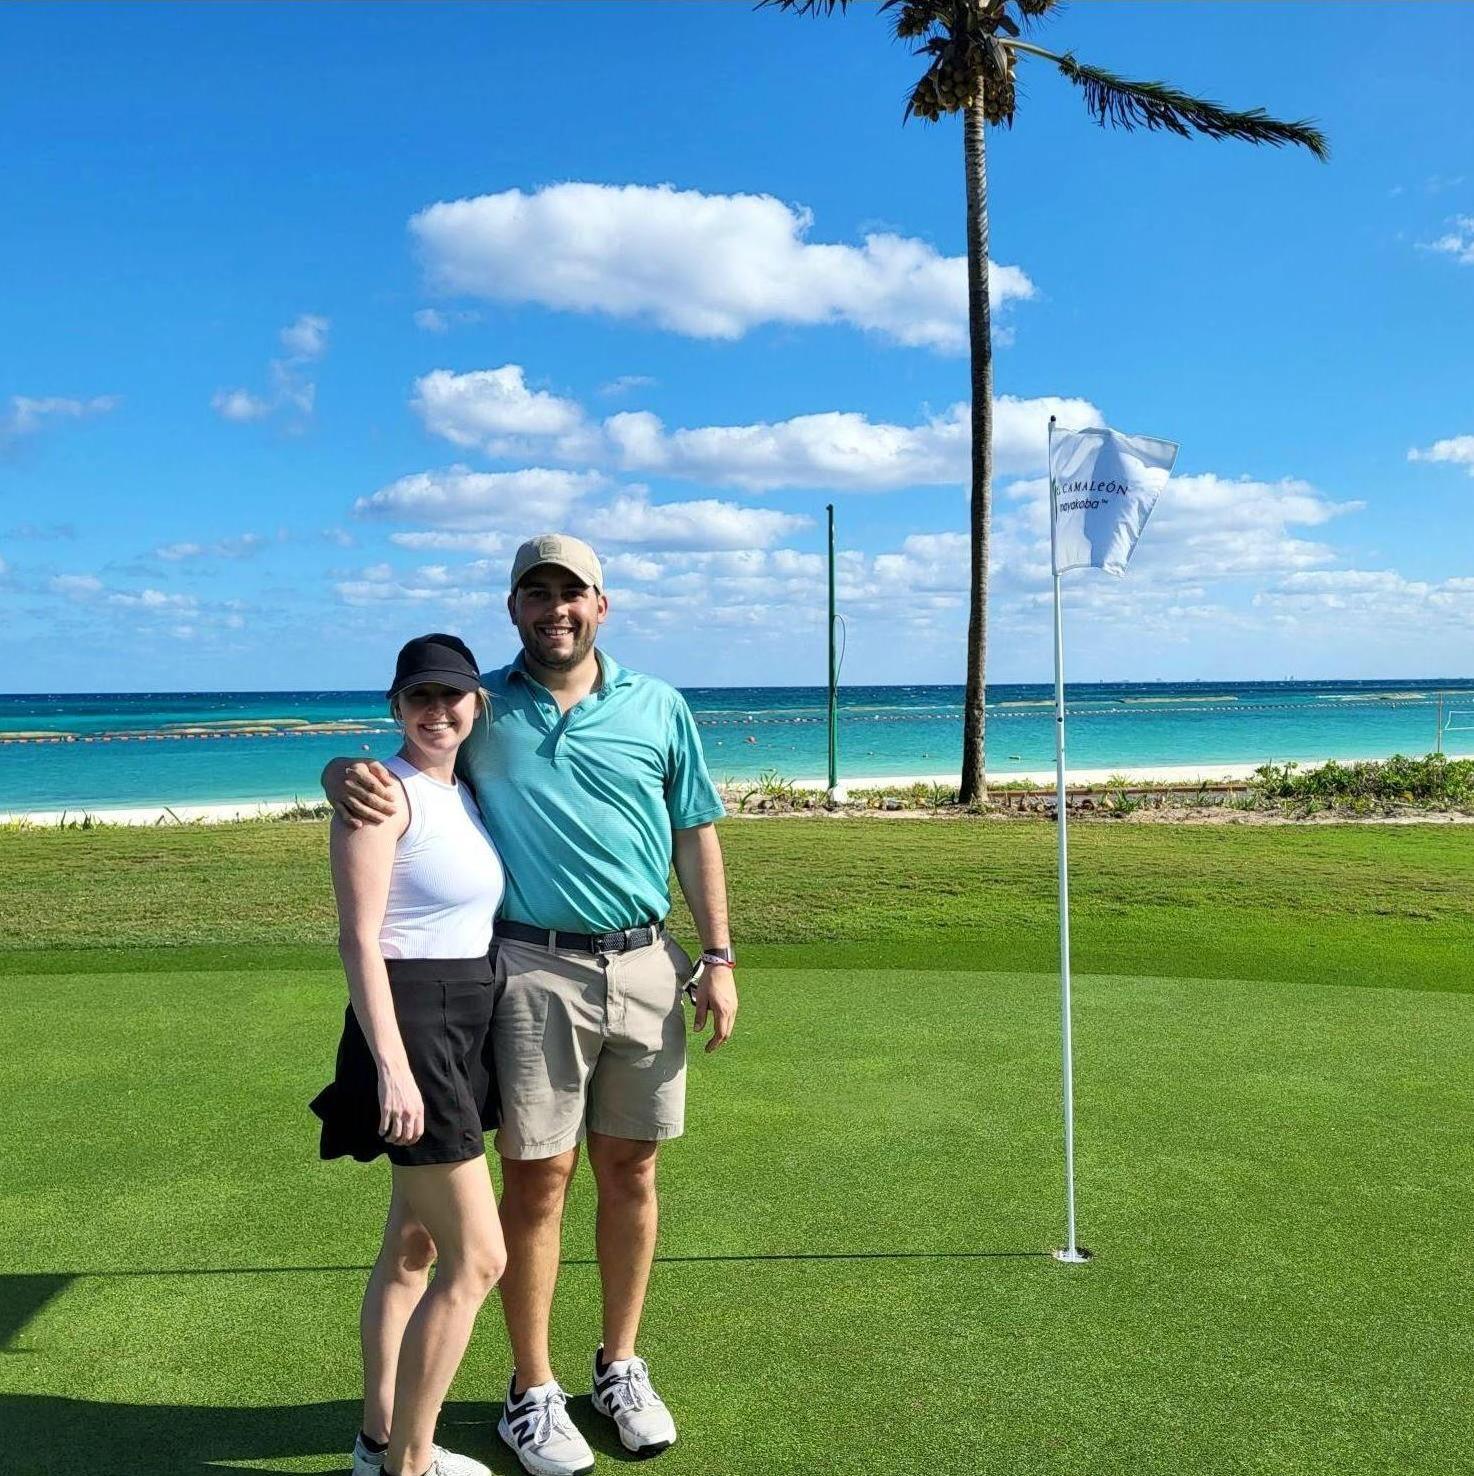 Golfing in Mexico. 1/14/23